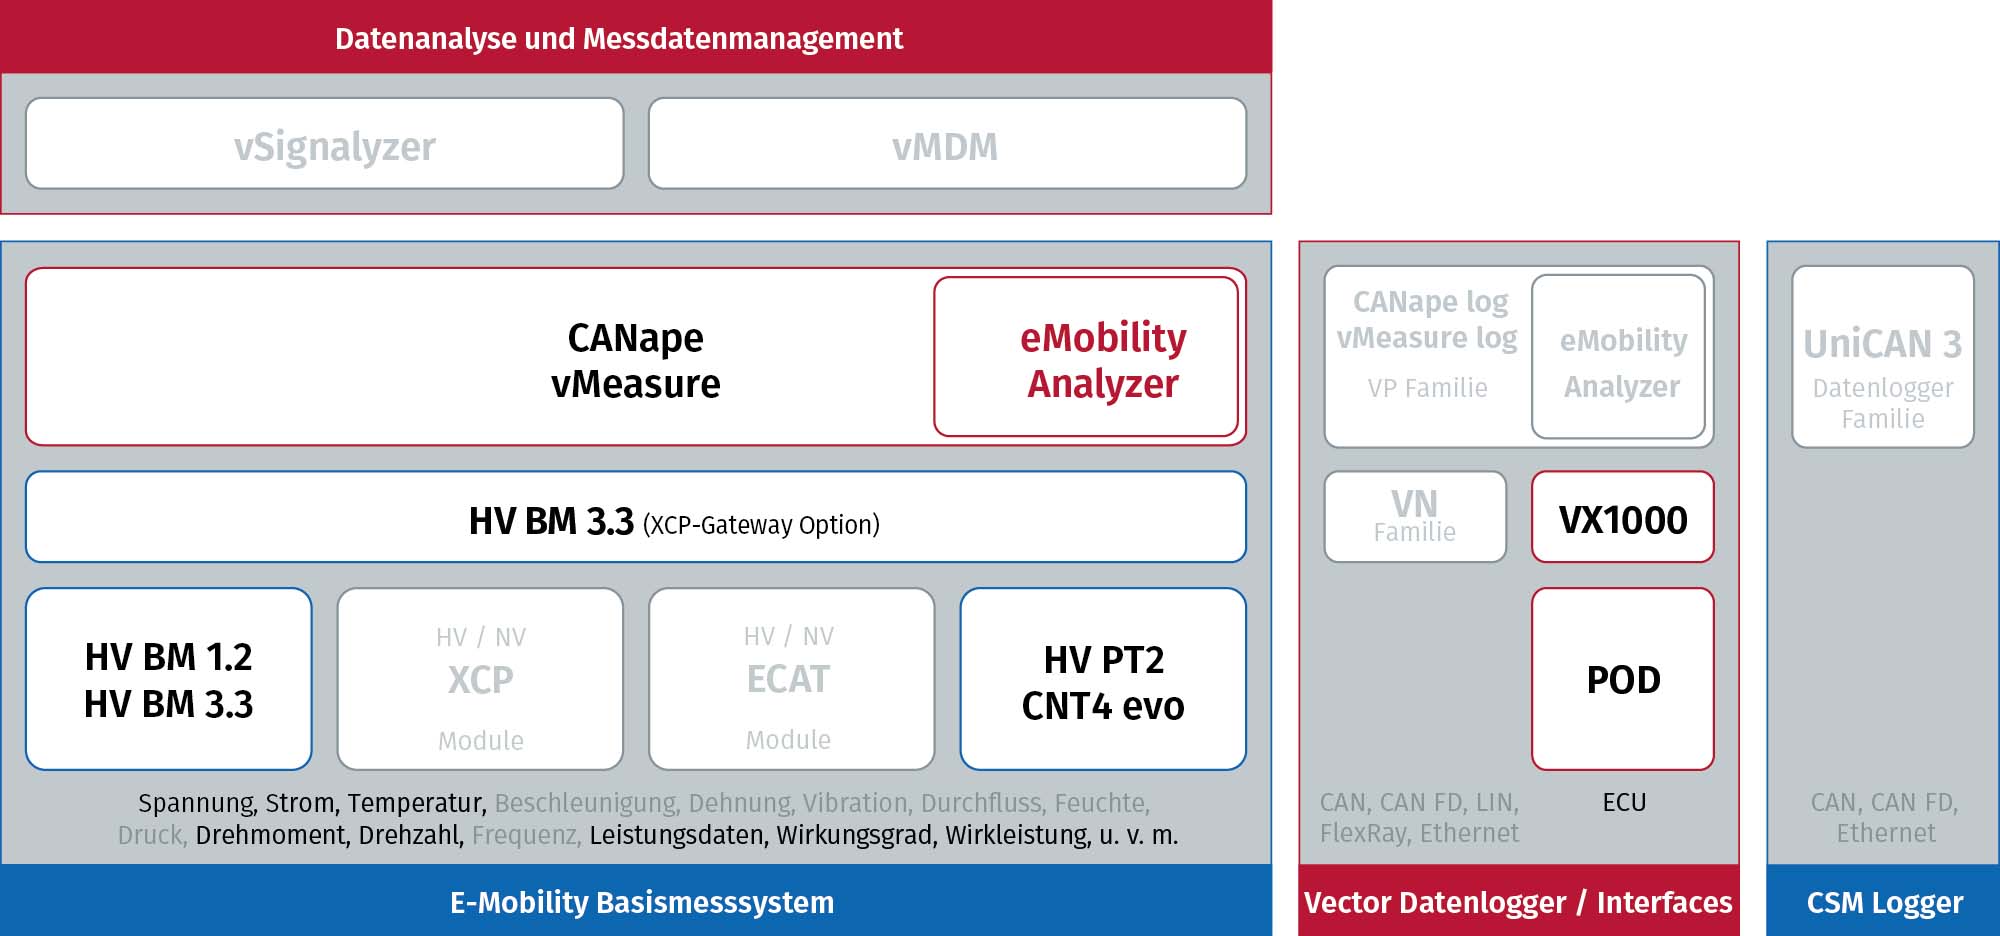 Wirkungsgradmessung in E-Mobility-Messsystem